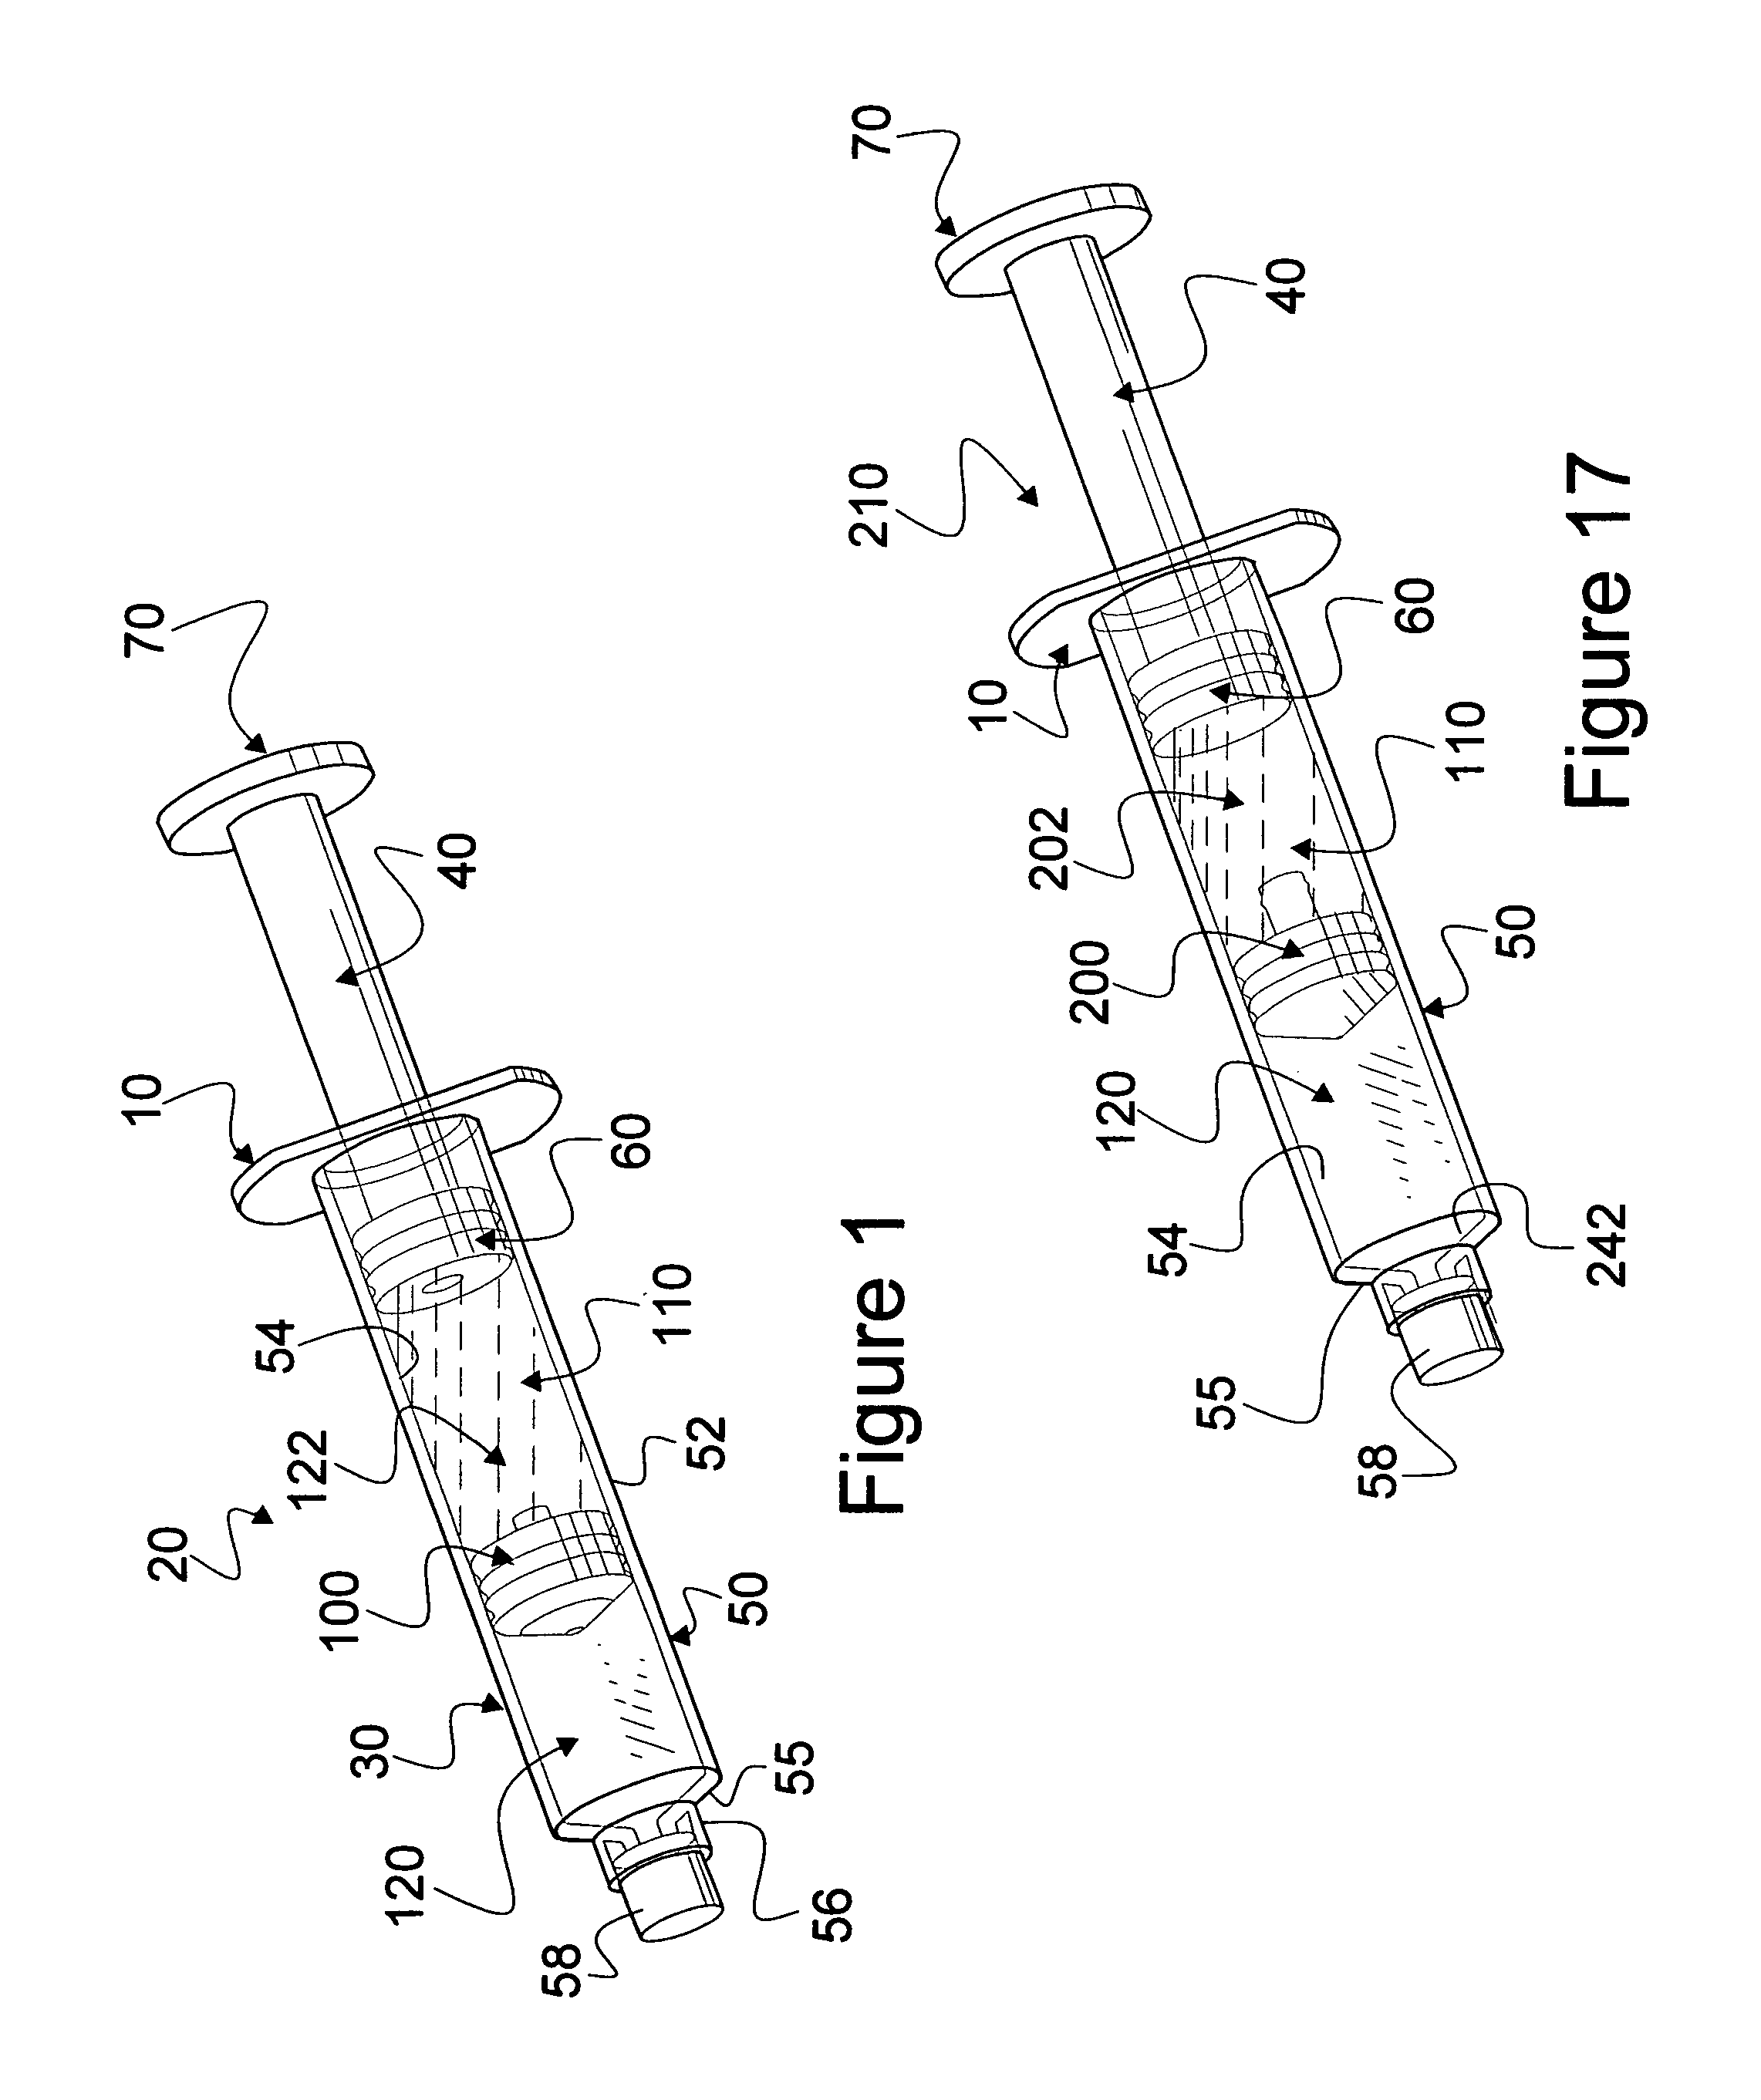 Pressure actuated valve for multi-chamber syringe applications